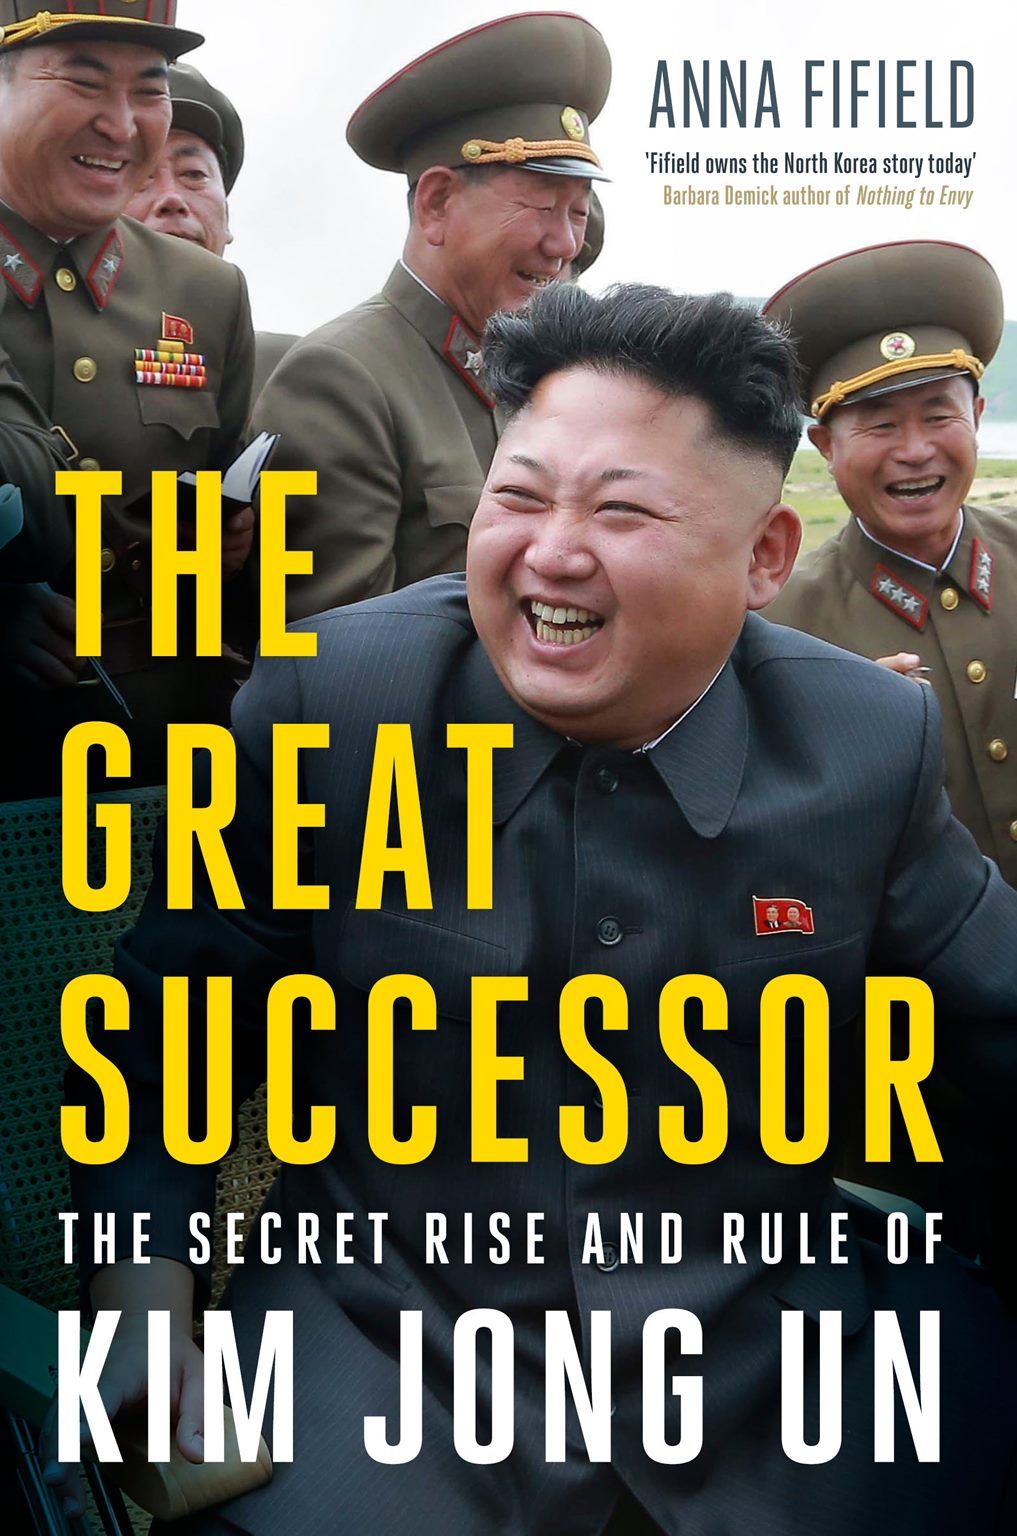 THE GREAT SUCCESSOR: The Secret Rise and Rule of Kim Jong Un